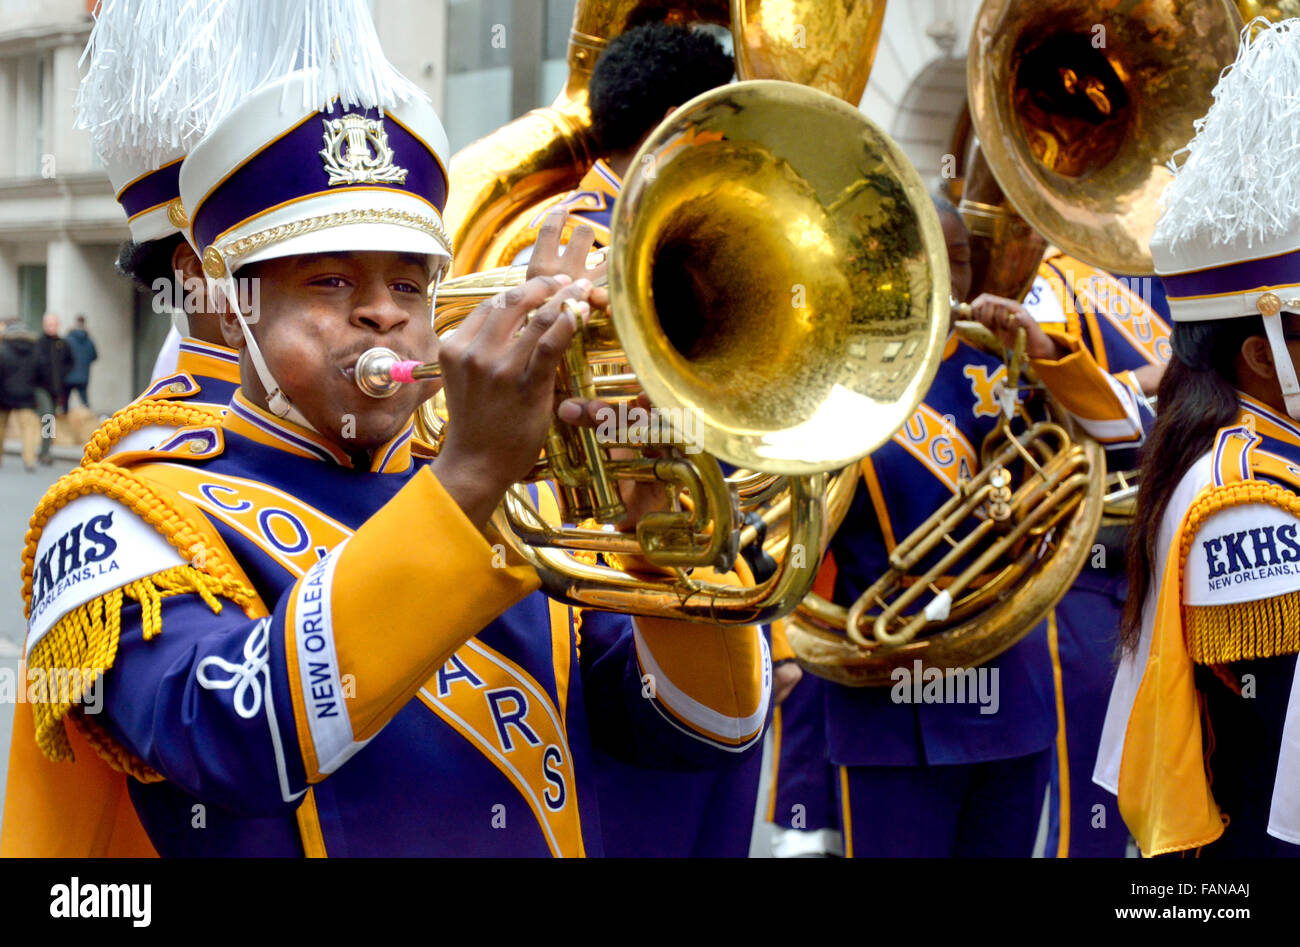 London, UK. New Year's Day parade Jan 1 2016. Marching band - Edna Karr High School Cougar band from New Orleans. Flugelhorn Stock Photo